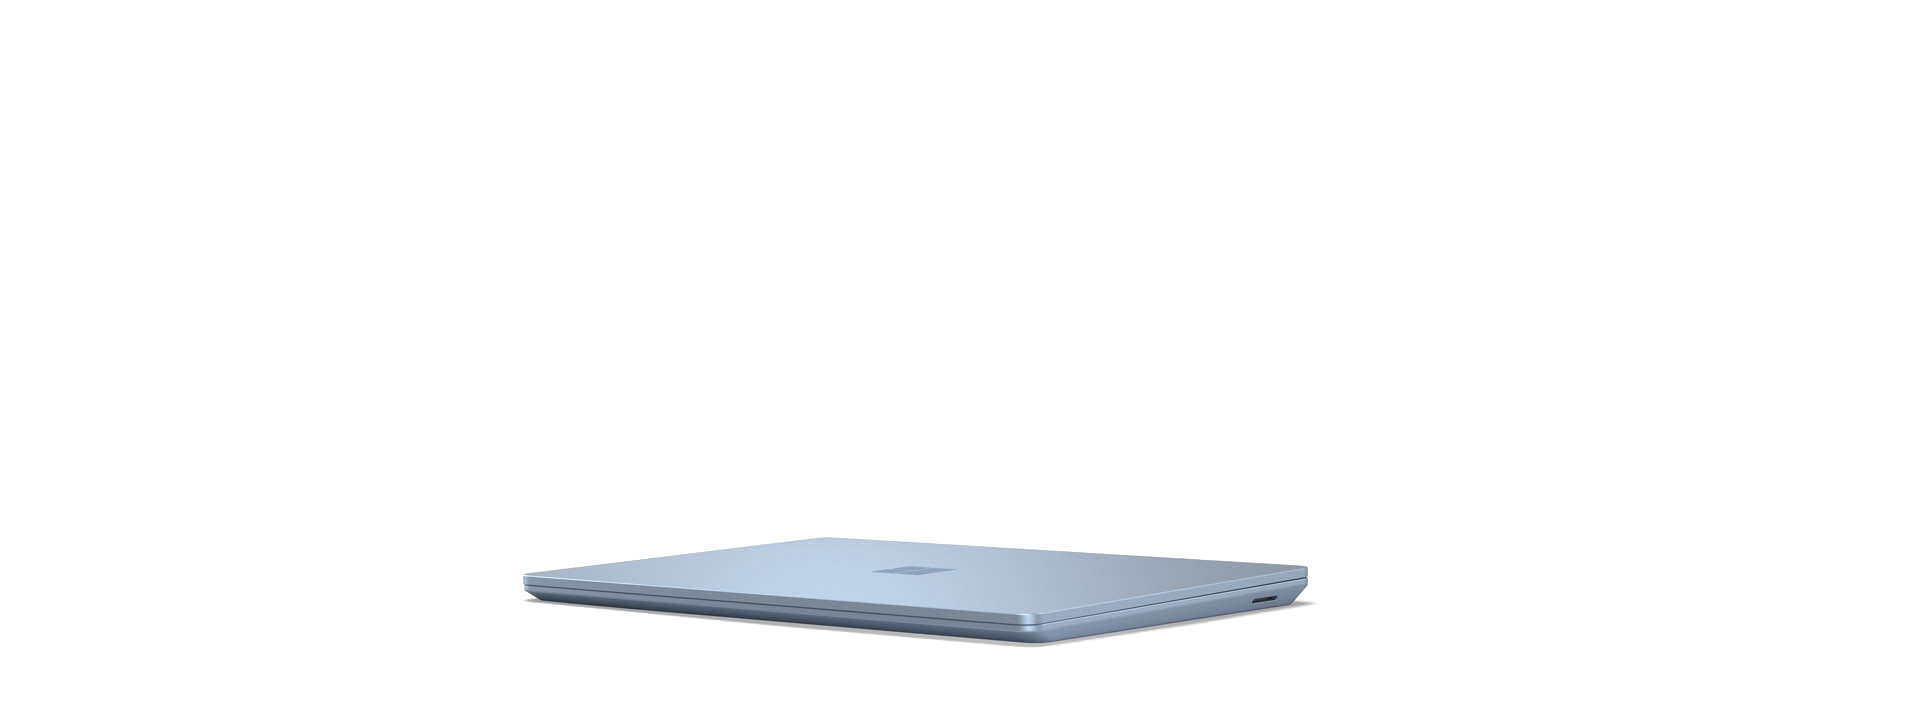 Surface Laptop Go 360 度旋转图